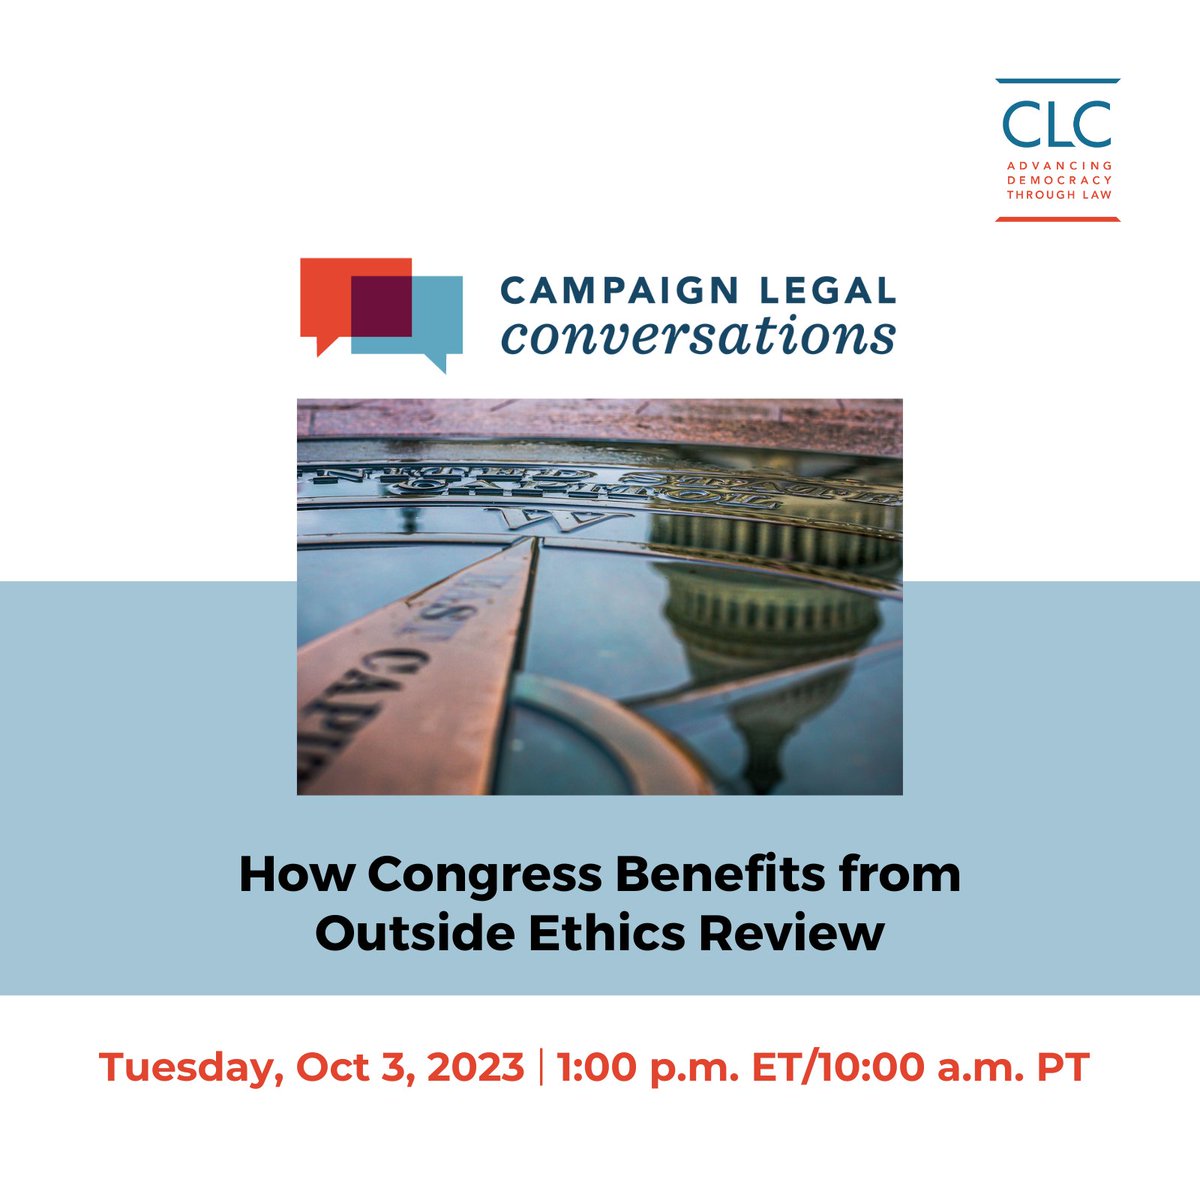 Today's the day! Join us at 1:00 p.m. ET for 'How Congress Benefits from Outside Ethics Review', a #CampaignLegalConversations event. There's still time to RSVP to join us: campaignlegal.org/events/how-con…